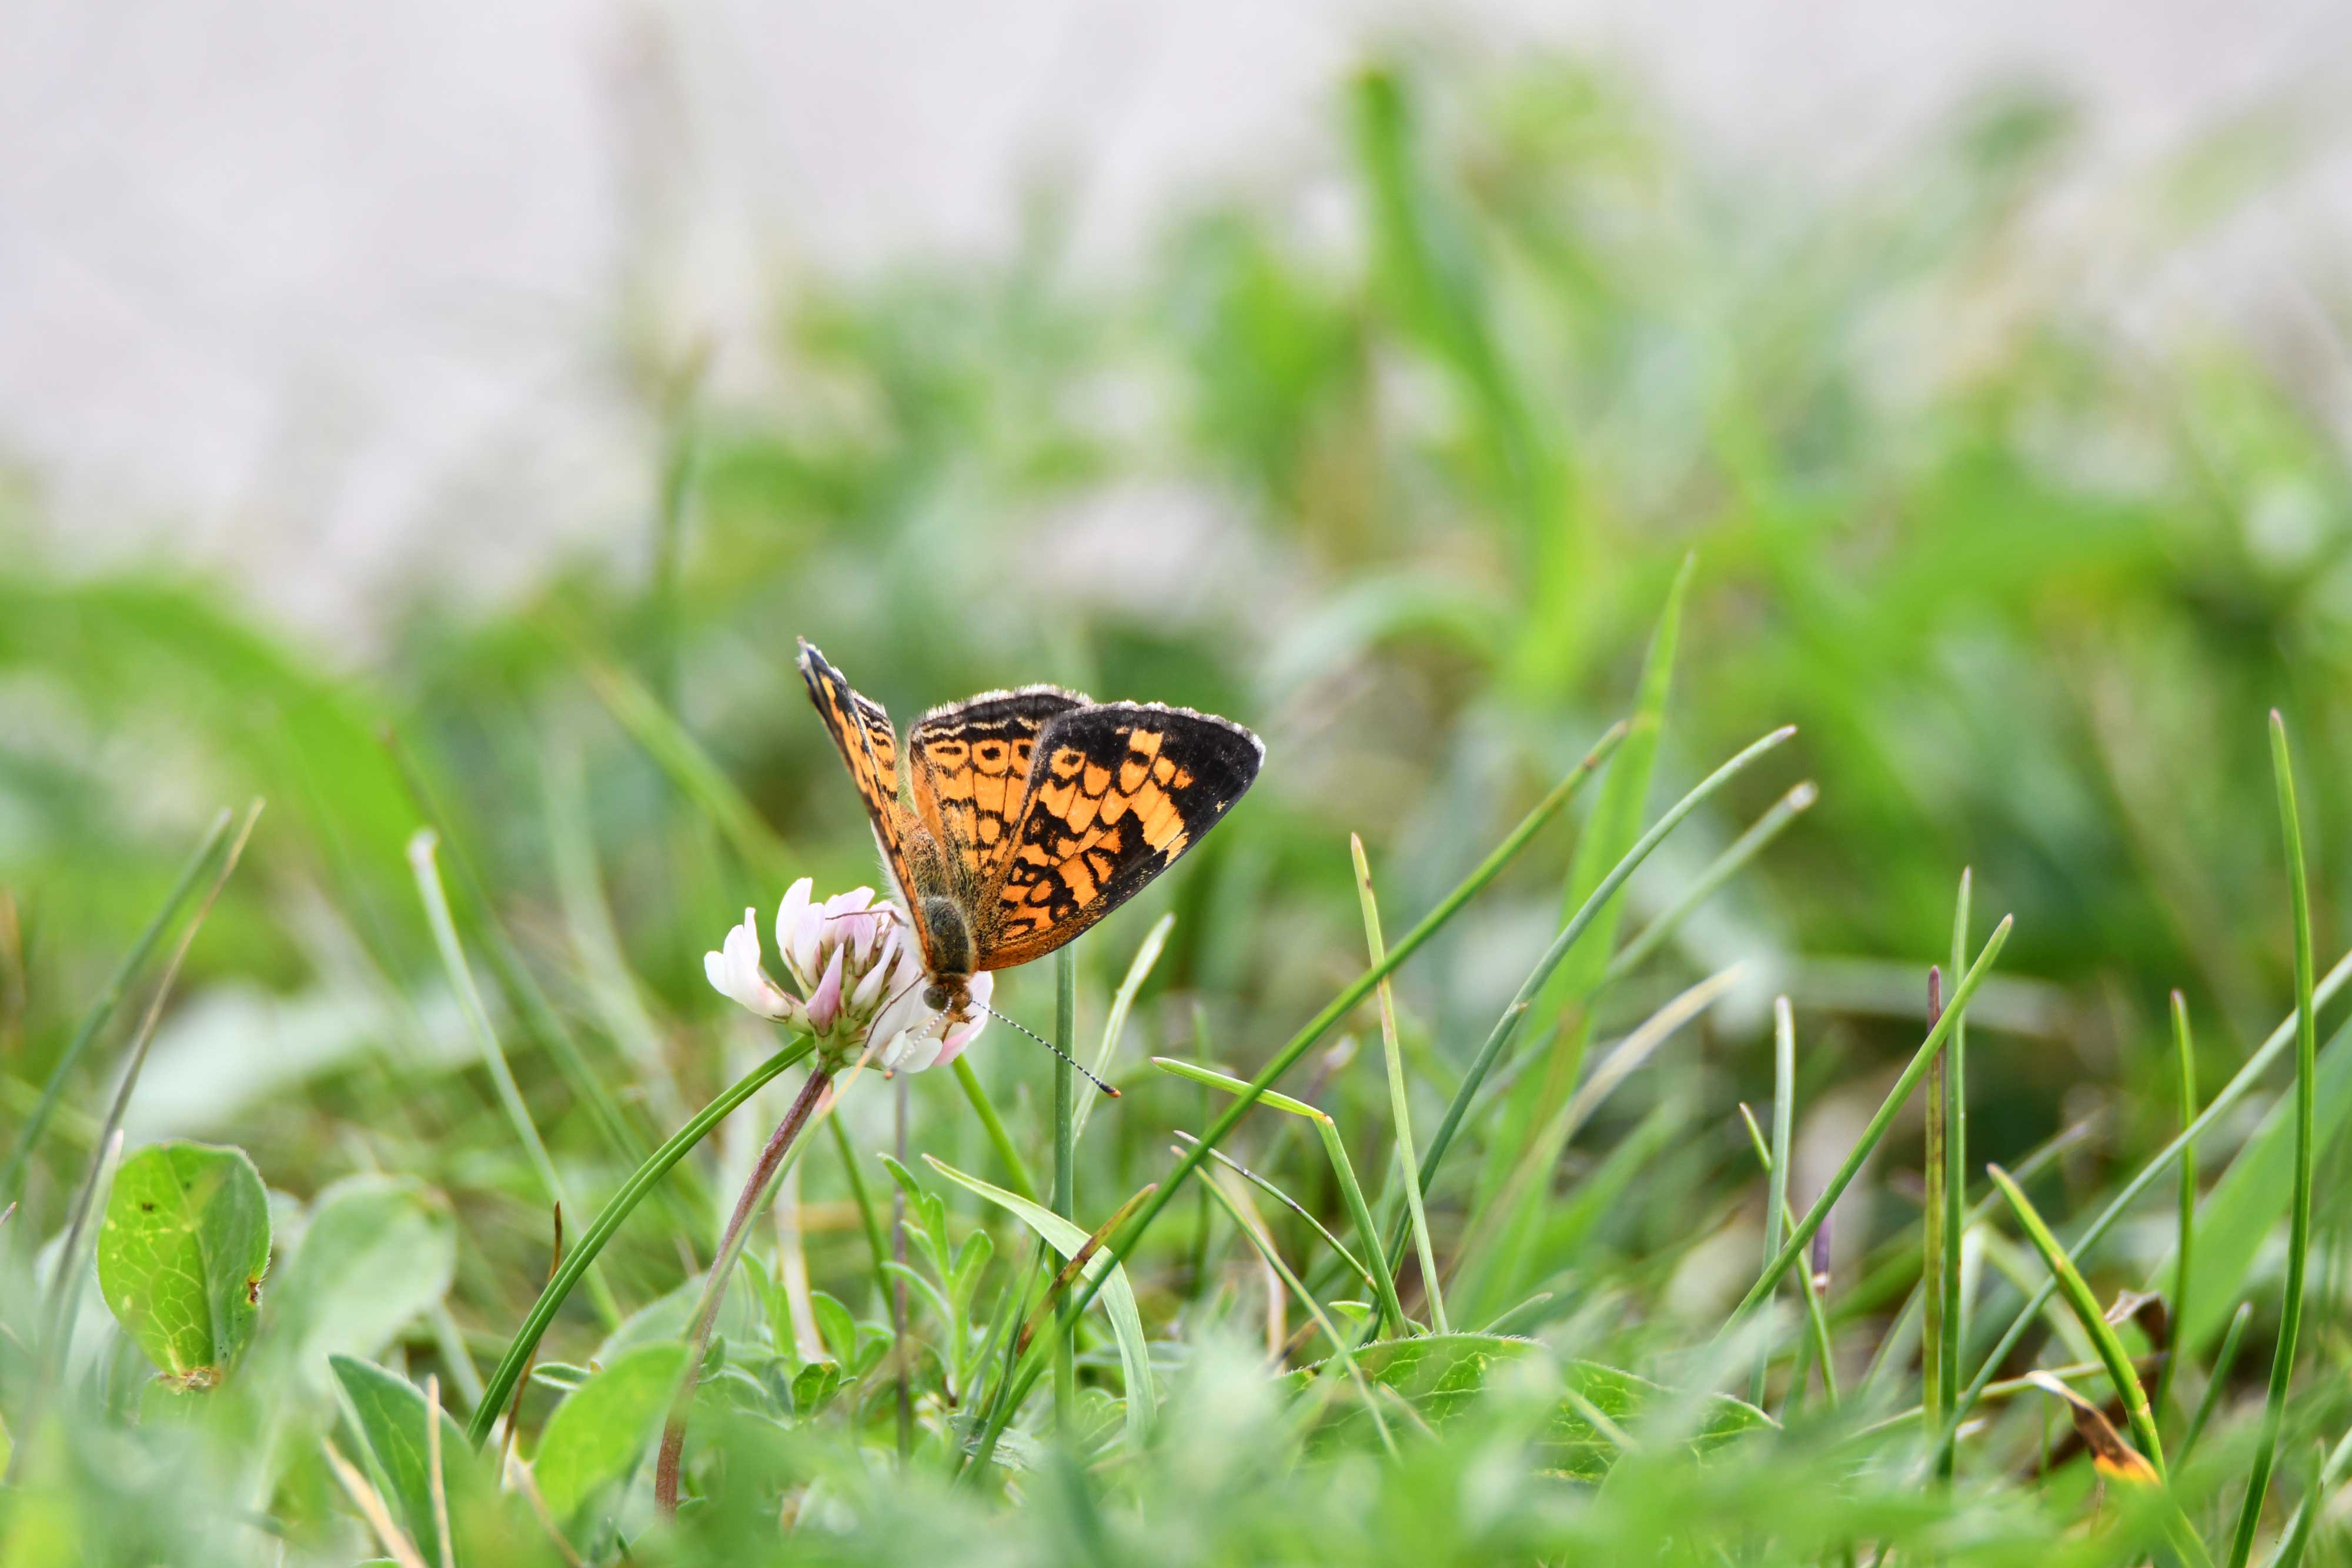 Pearl crescent butterfly in the grass